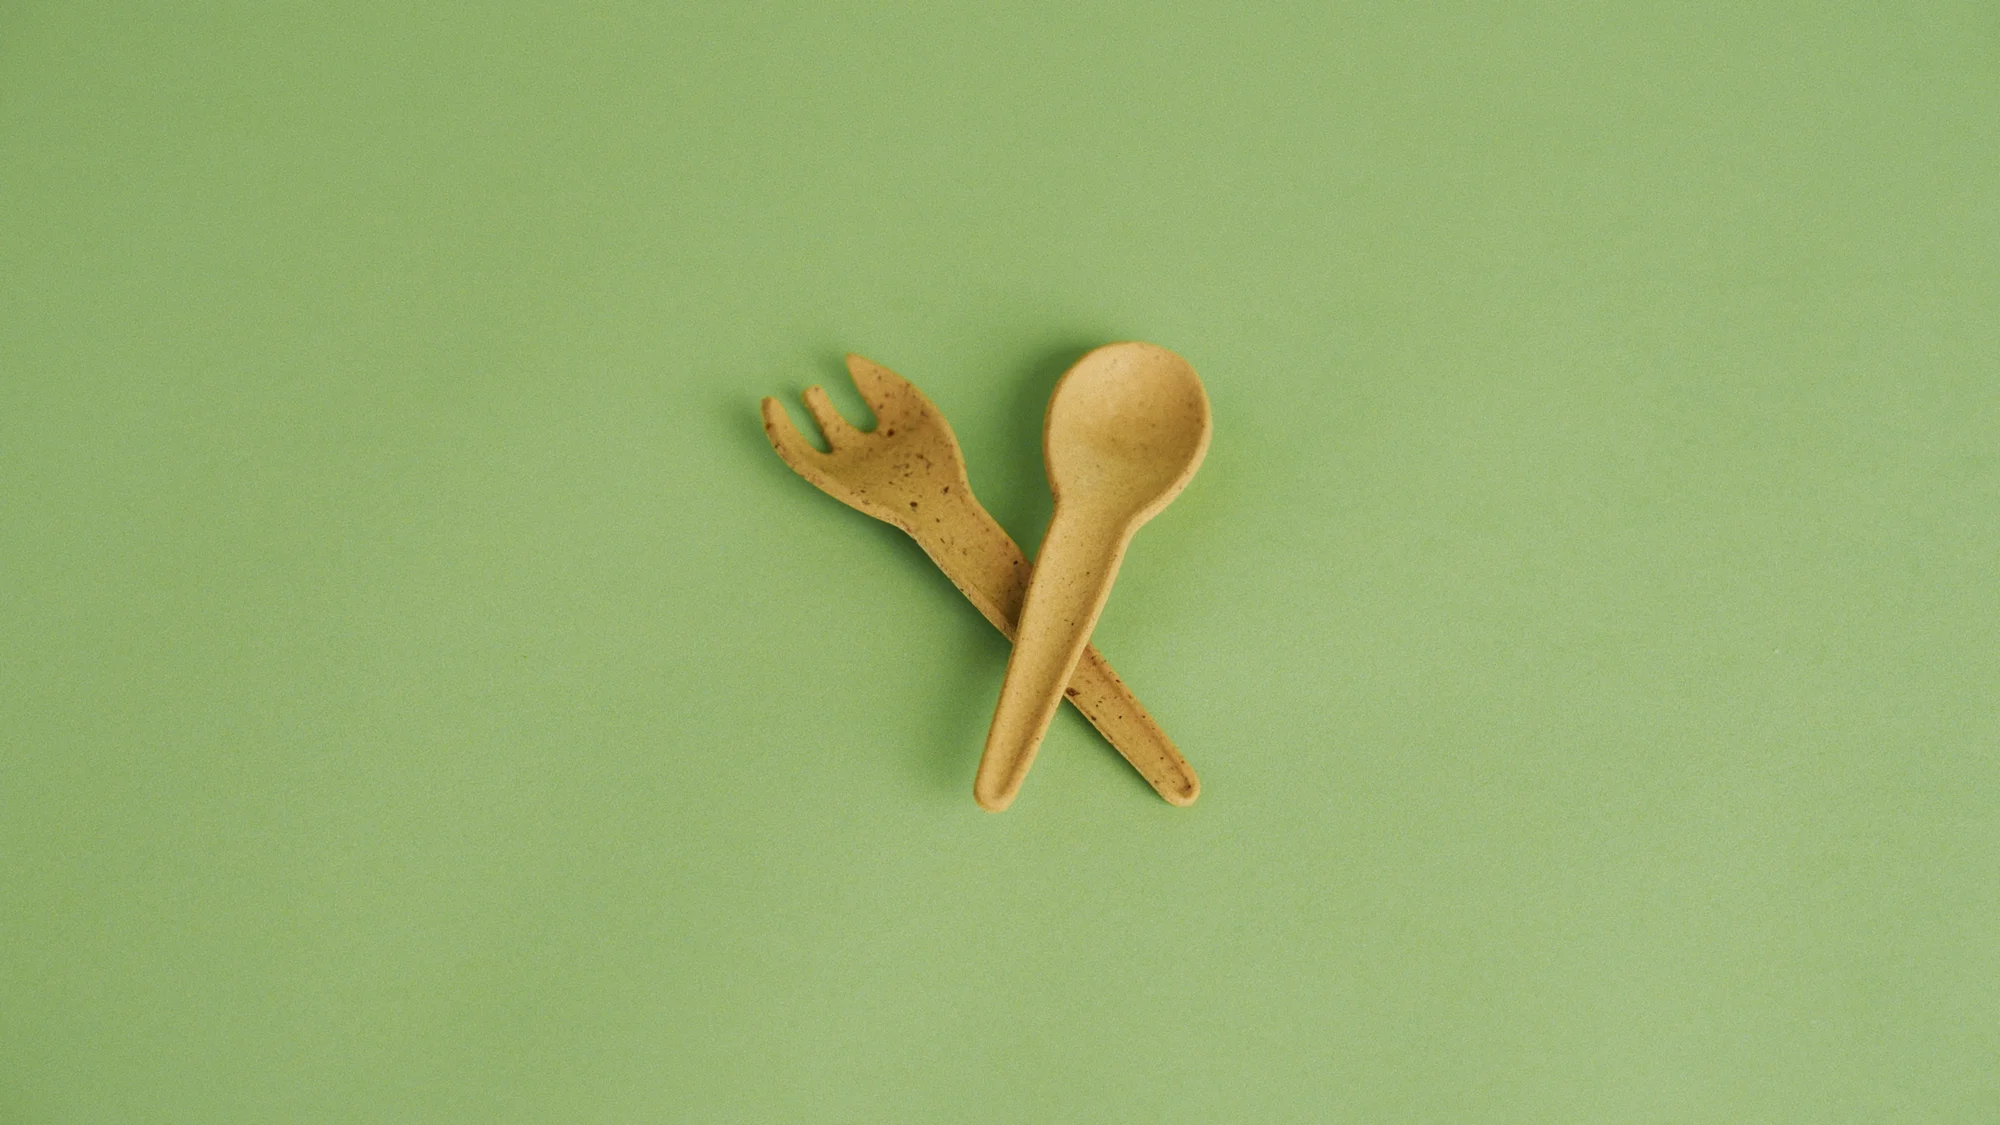 Meet Incredible Eats | Single-Use Plastic Challenge Winner Incredible Eats manufactures edible cutlery with non-GMO ingredients and were chosen to test their products at select Google foodspaces as part of the Single-Use Plastics Challenge.